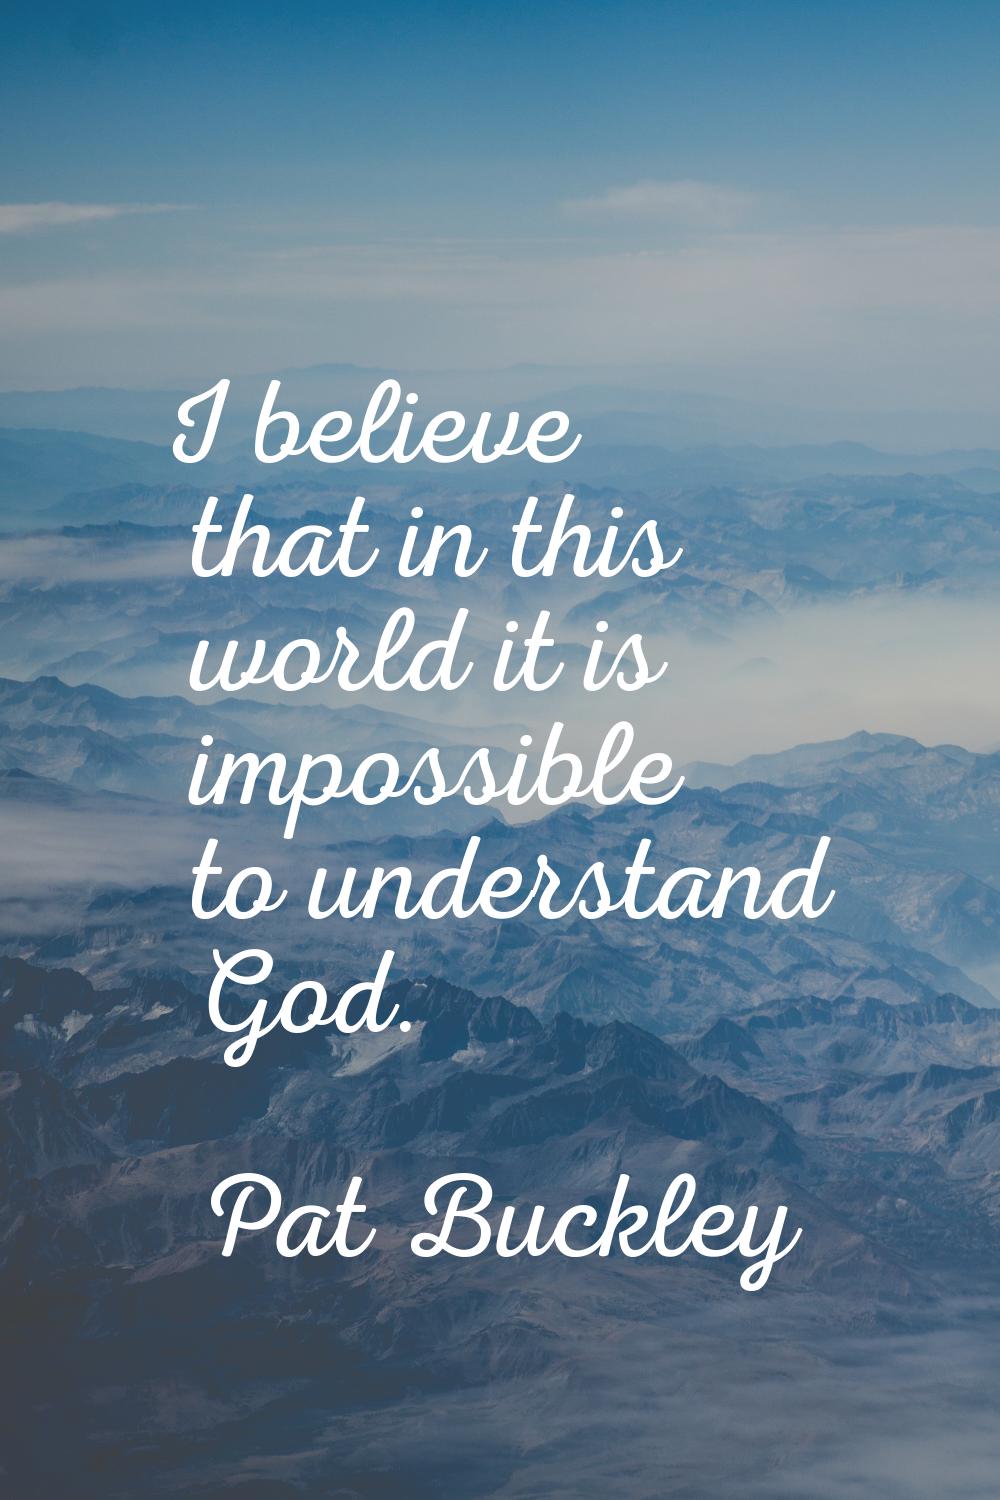 I believe that in this world it is impossible to understand God.